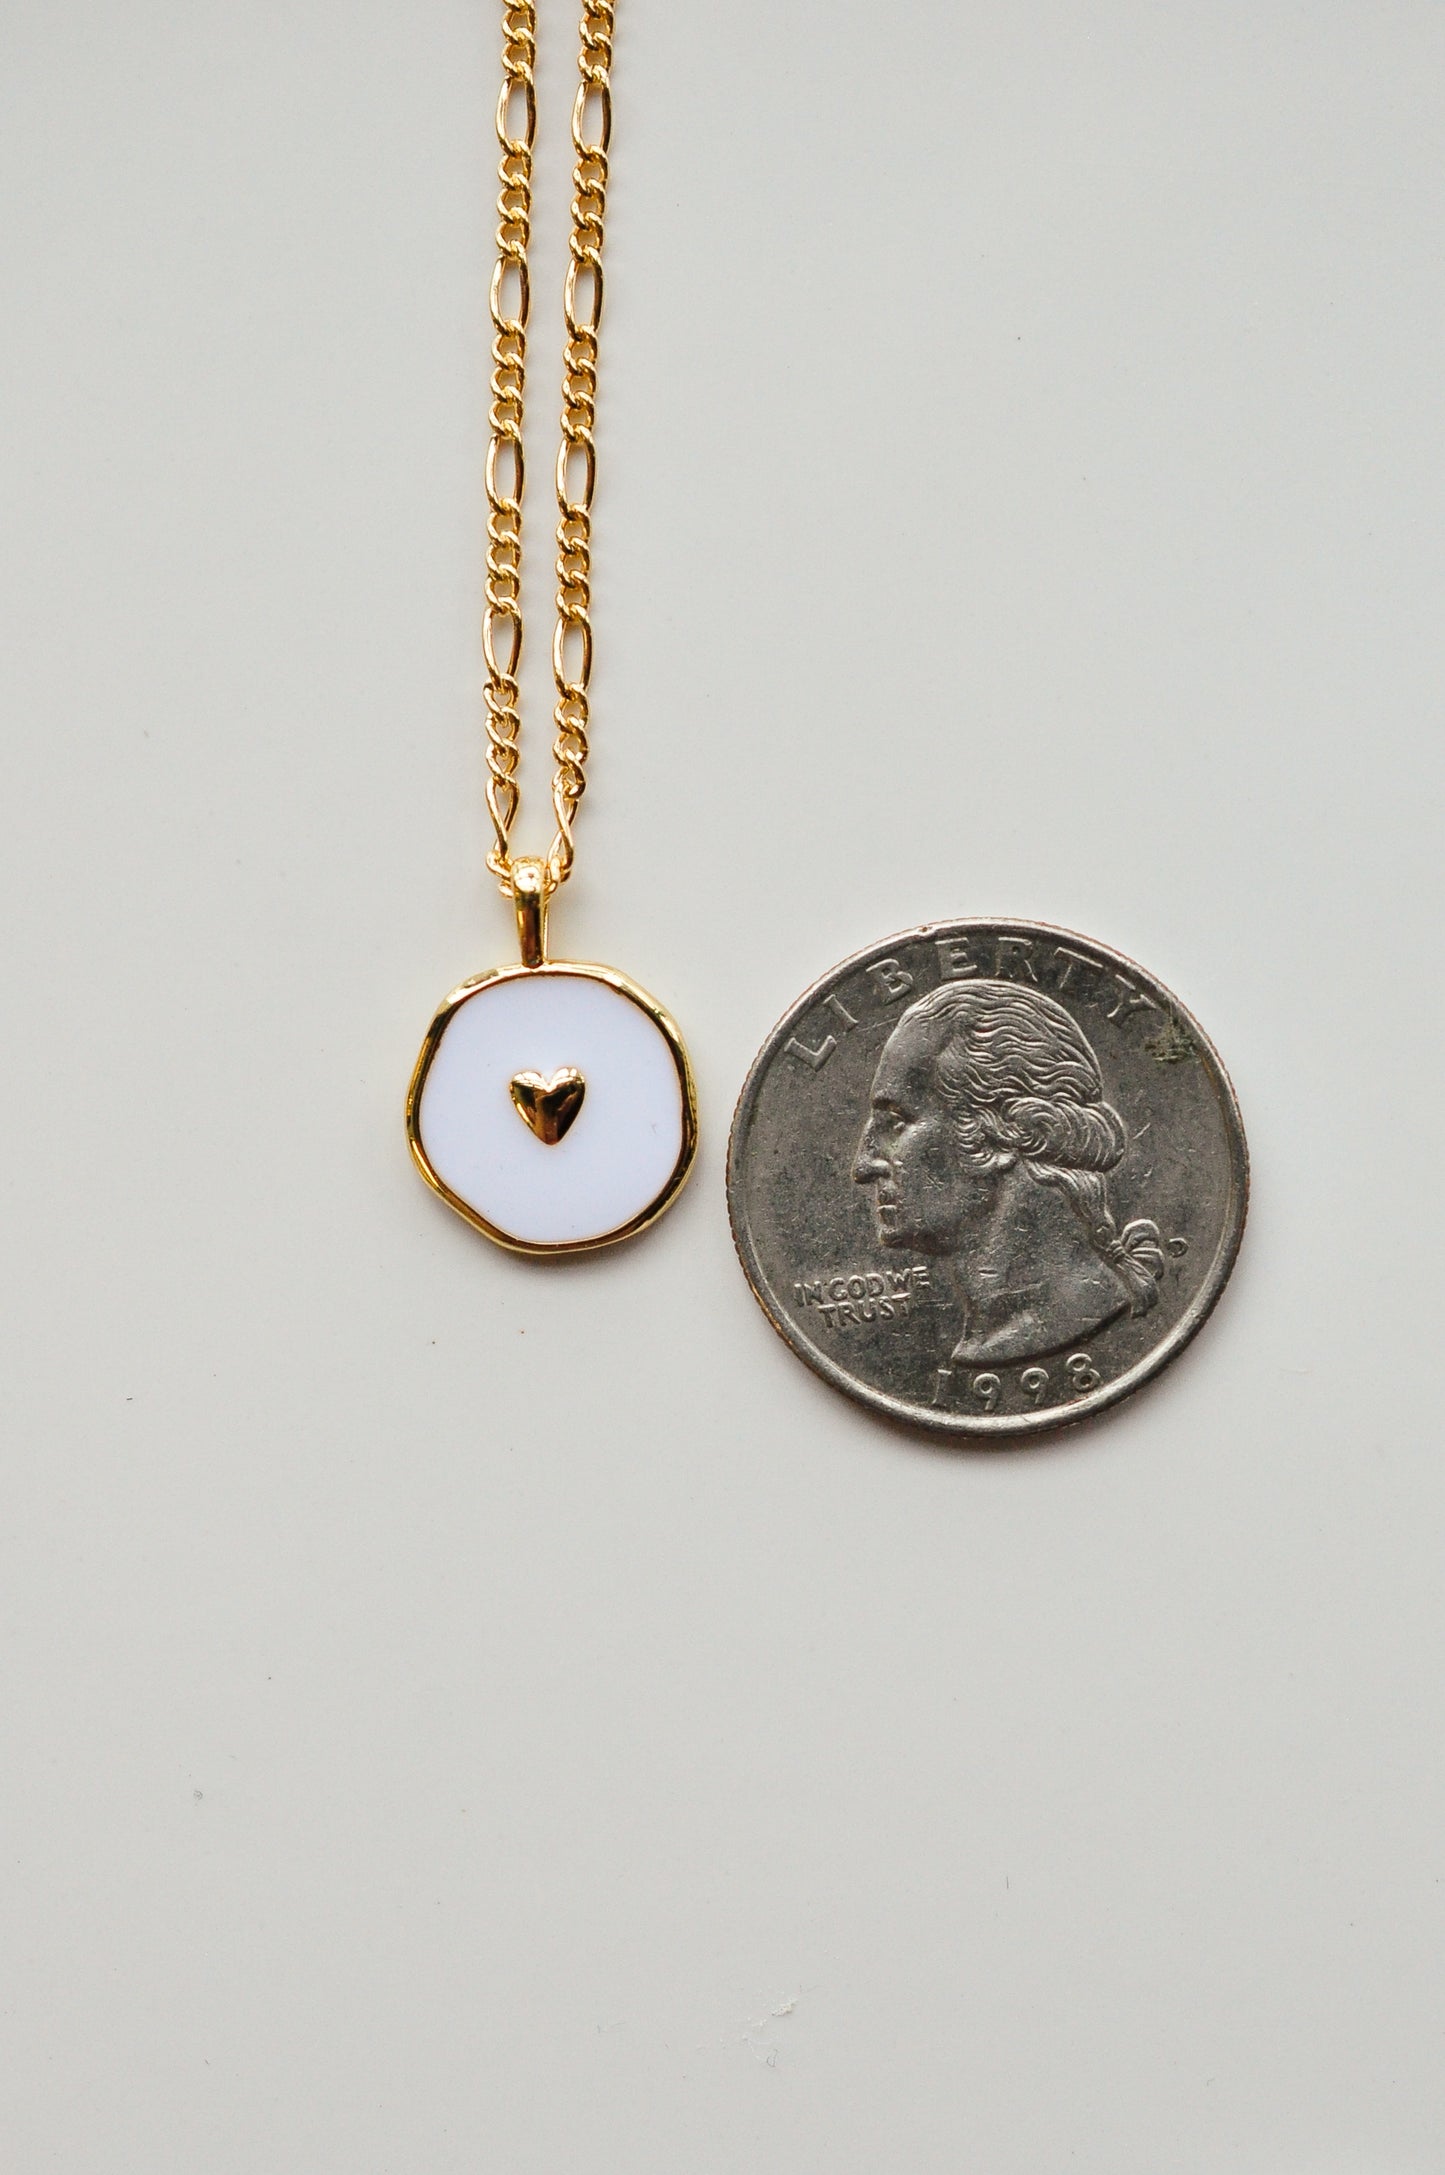 White & Gold Heart Charm Necklace